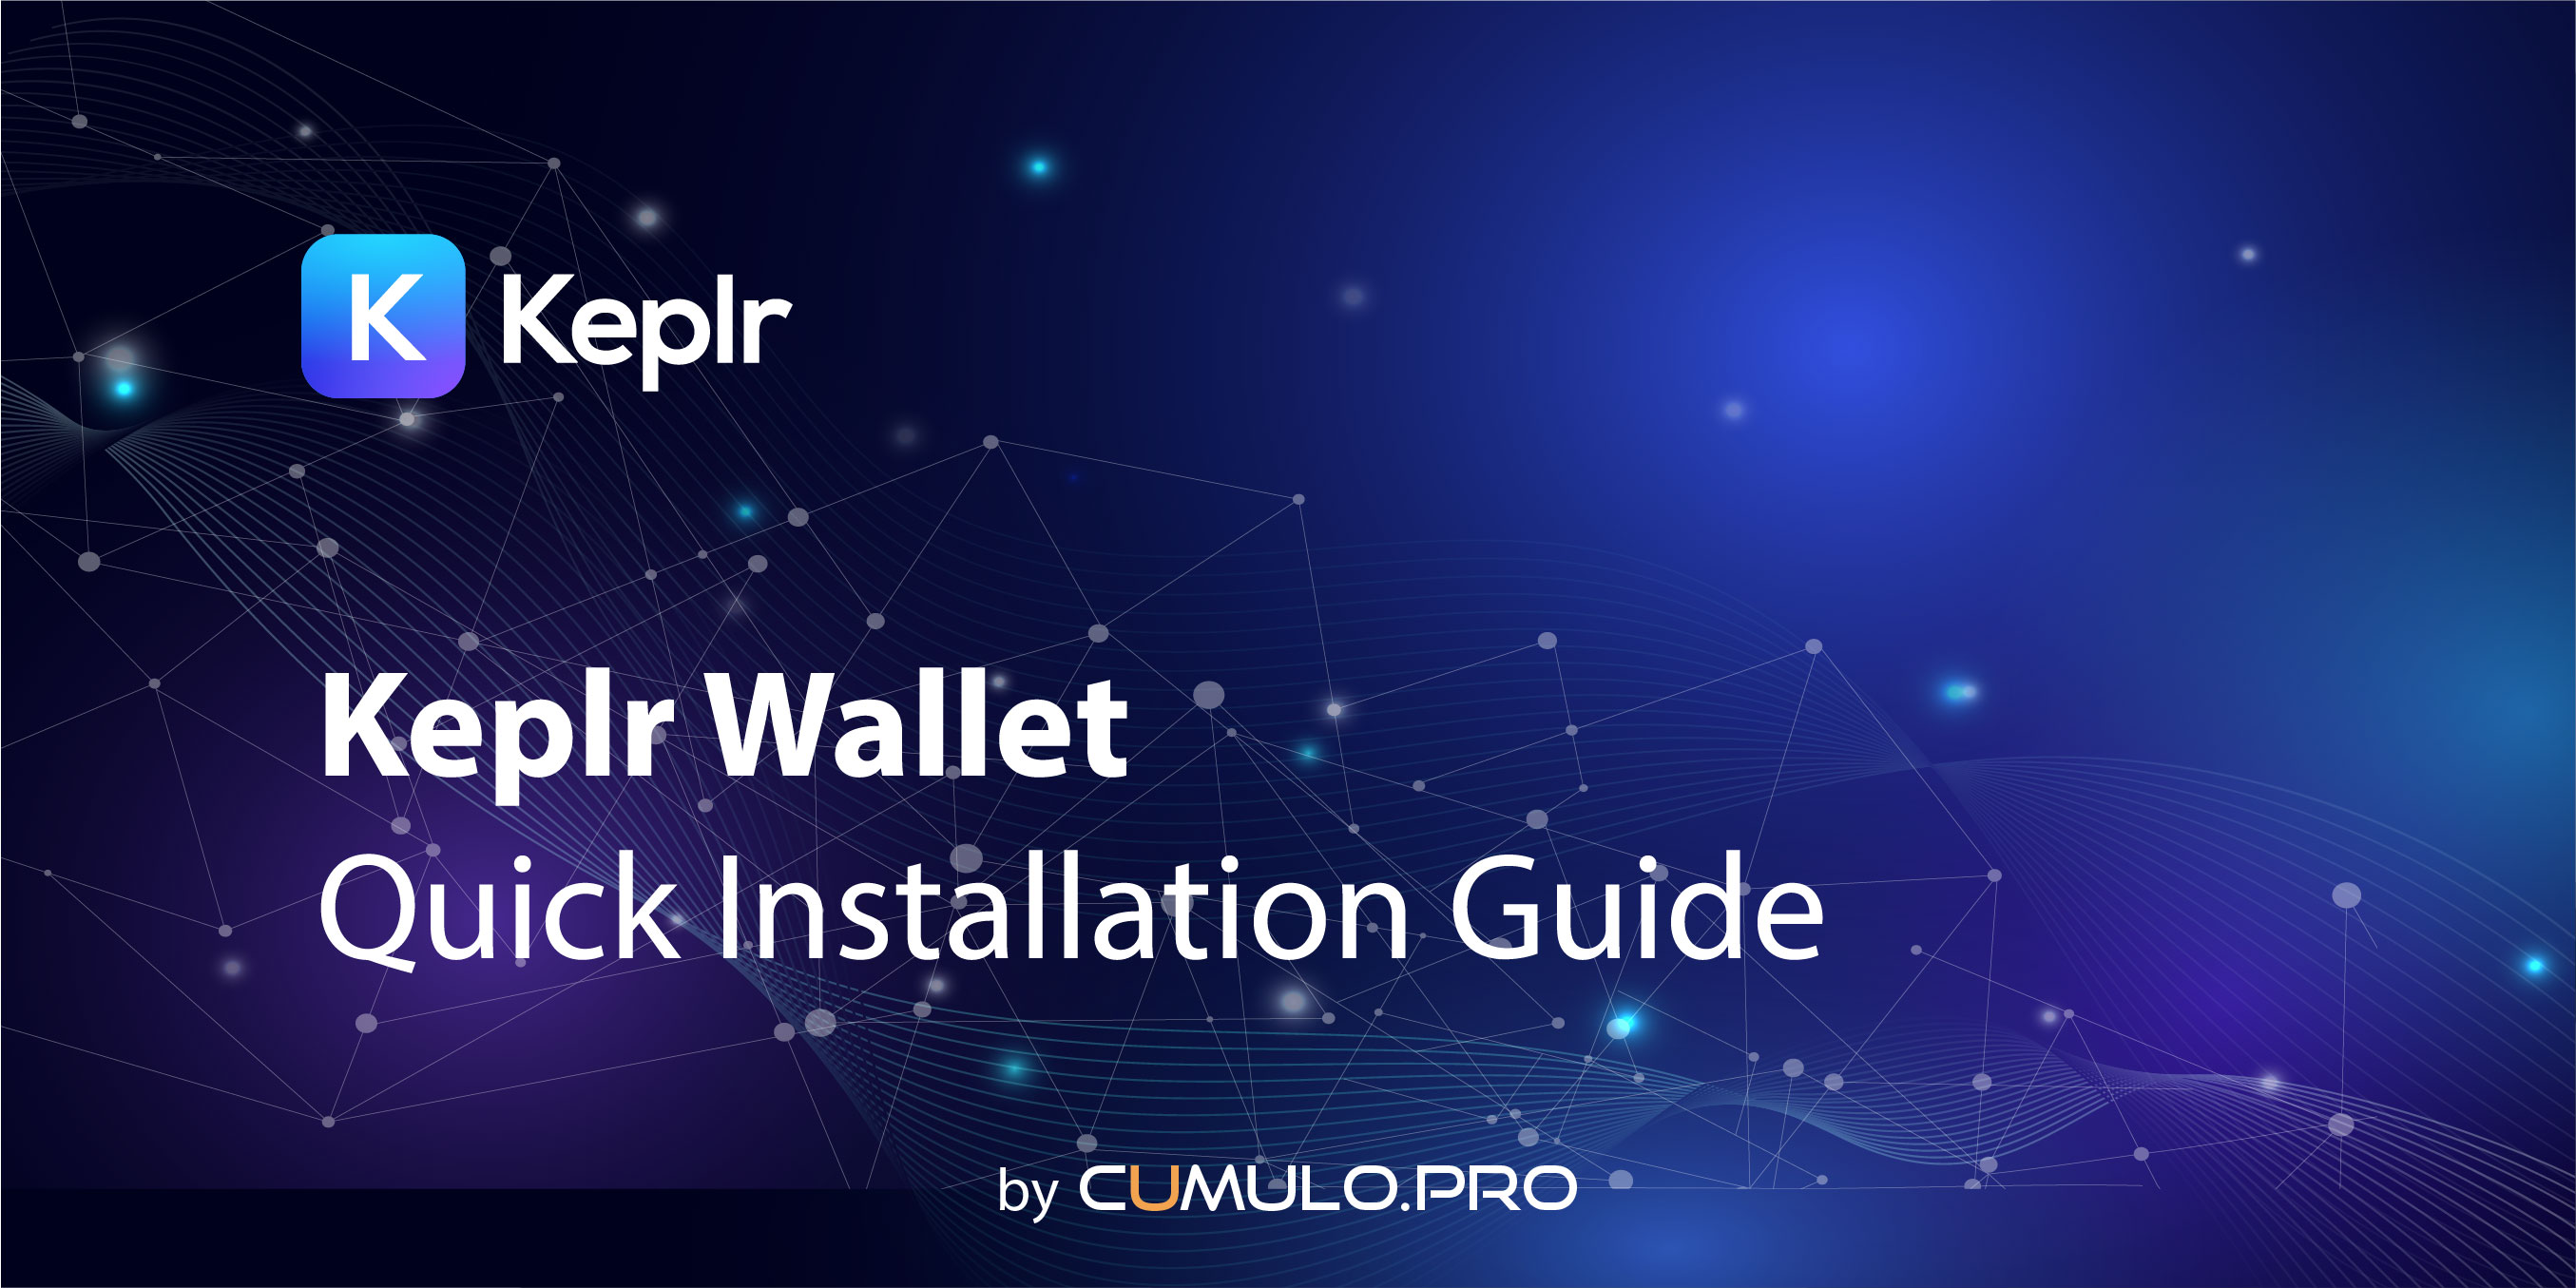 Keprl wallet quick installation guide